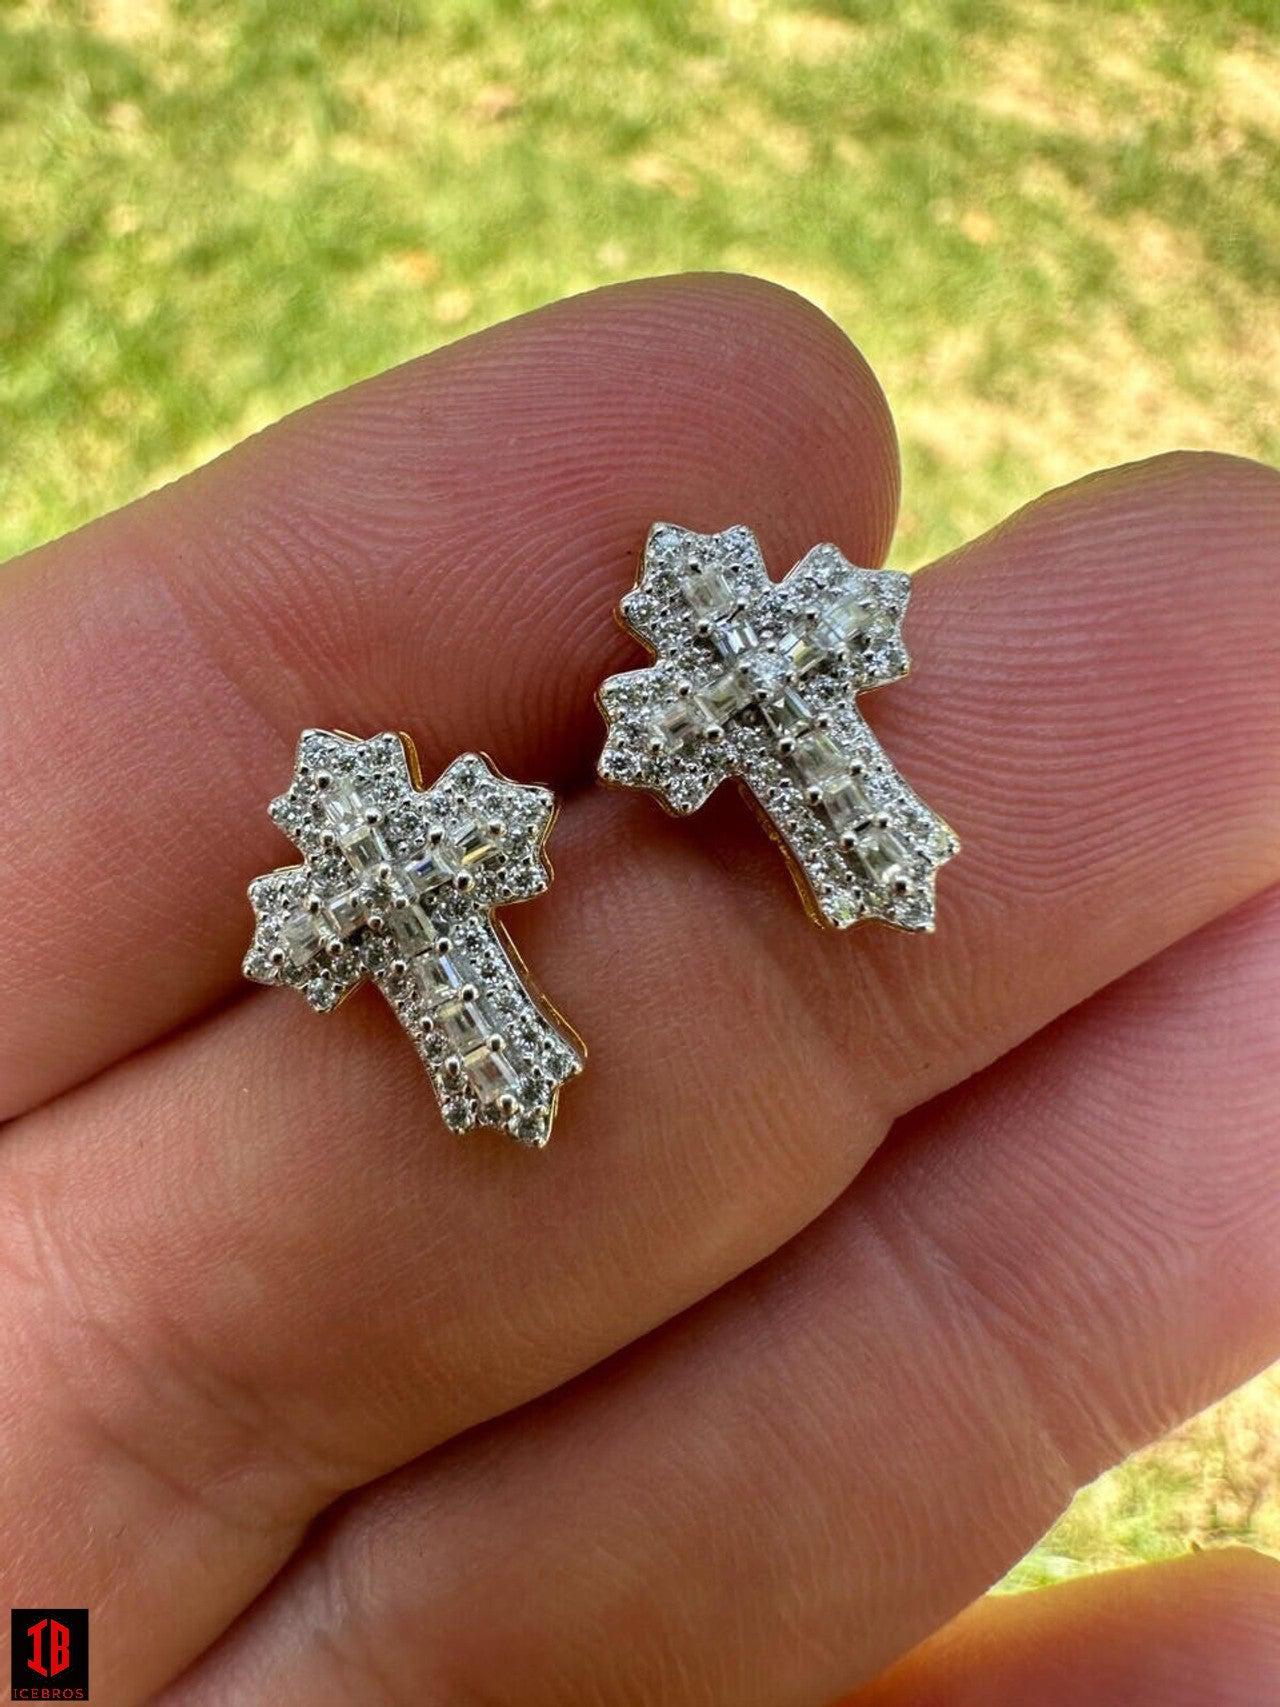 CZ  yellow gold Gothic Cross Large Earrings Real 925 Silver Iced Moissanite Hip Hop Mens Ladies